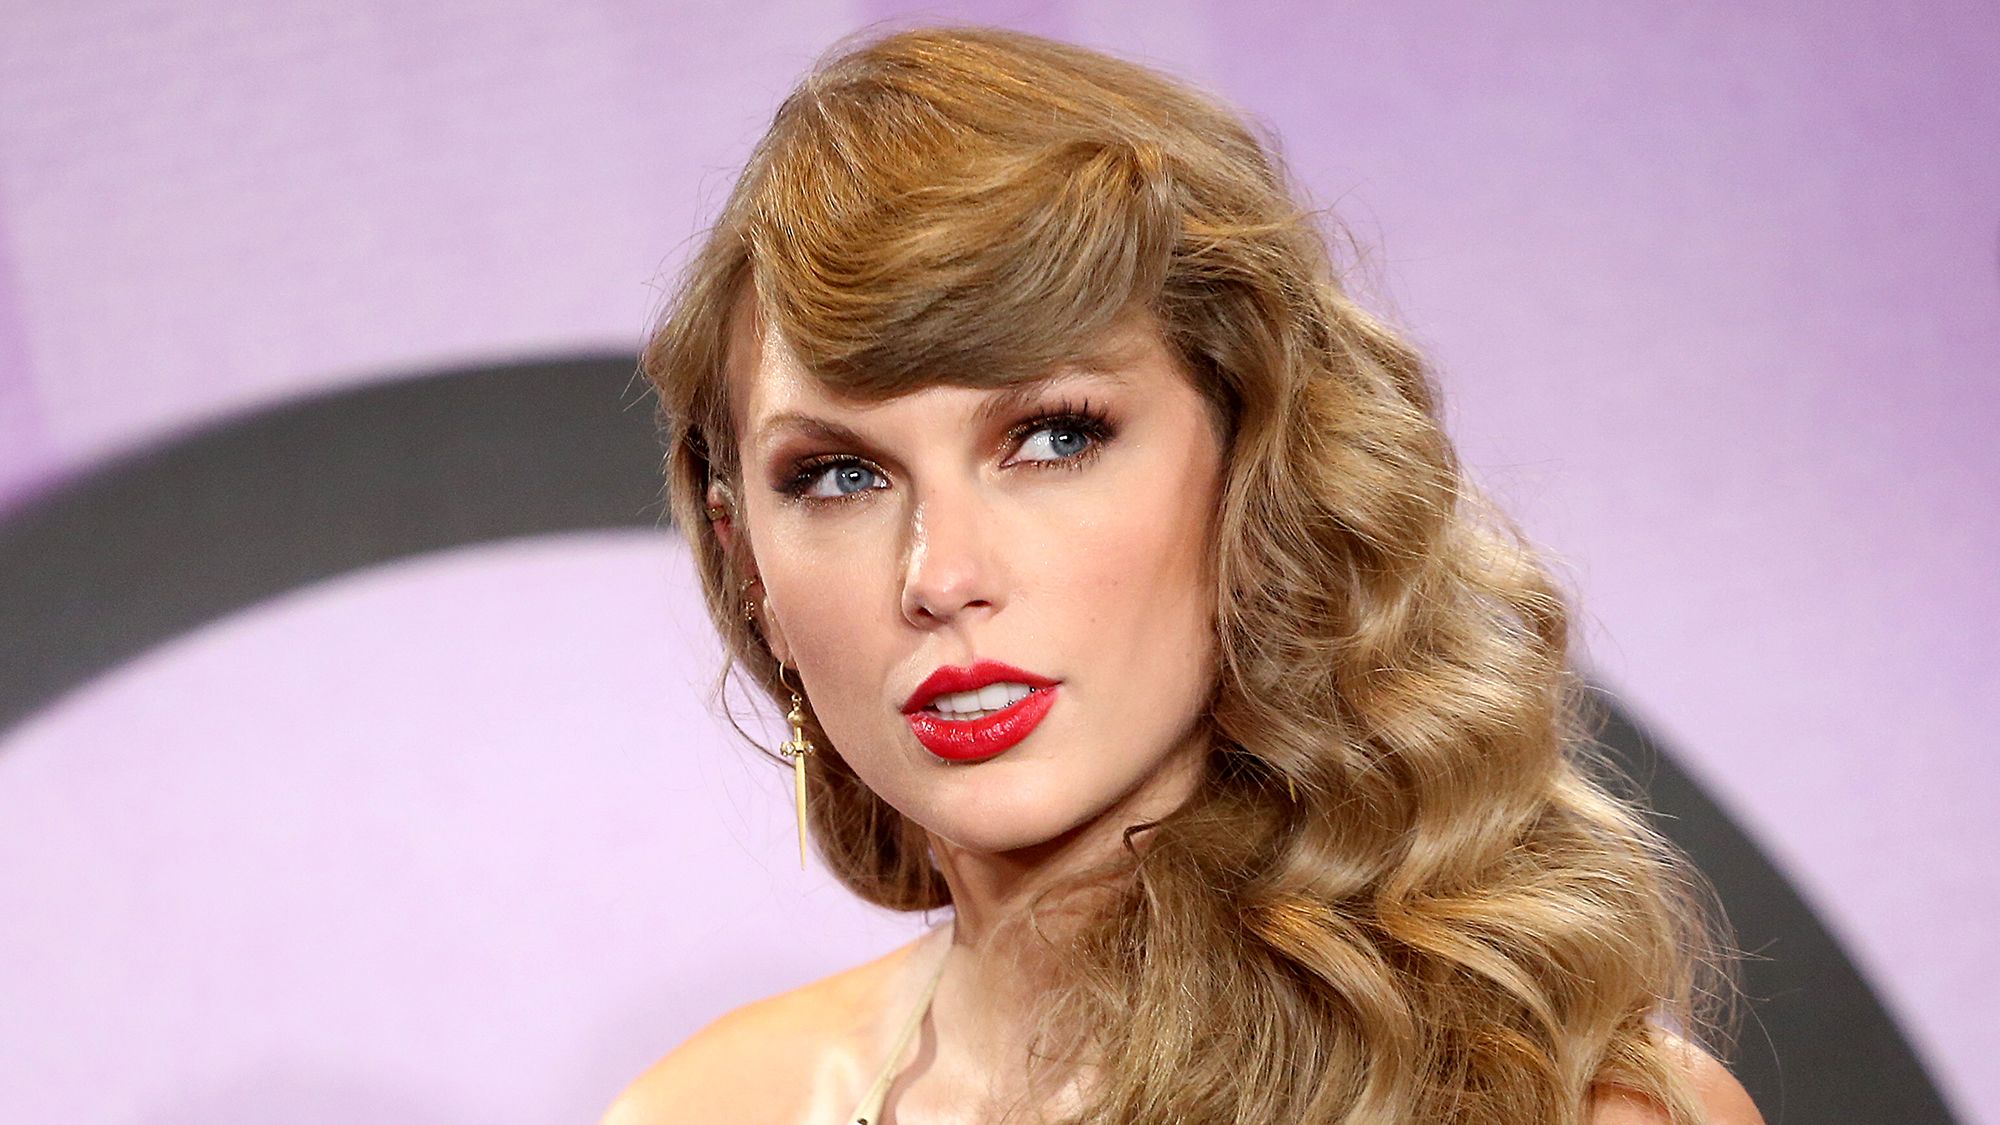 Taylor Swift heads to NY recording studio amid reported romance